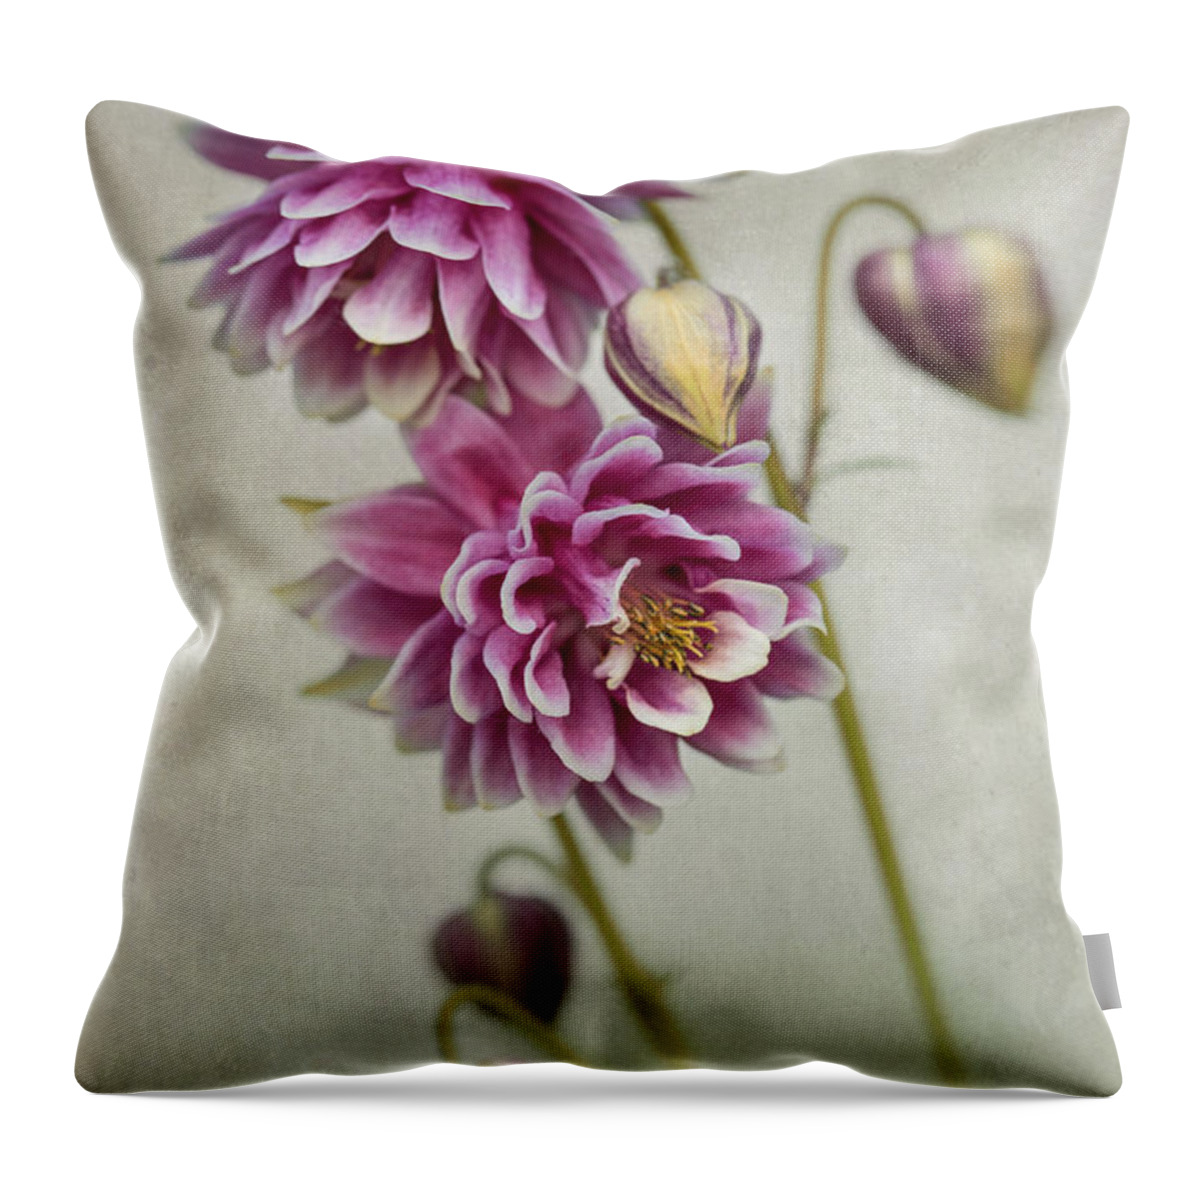 Colorful Throw Pillow featuring the photograph Delicate pink columbine by Jaroslaw Blaminsky